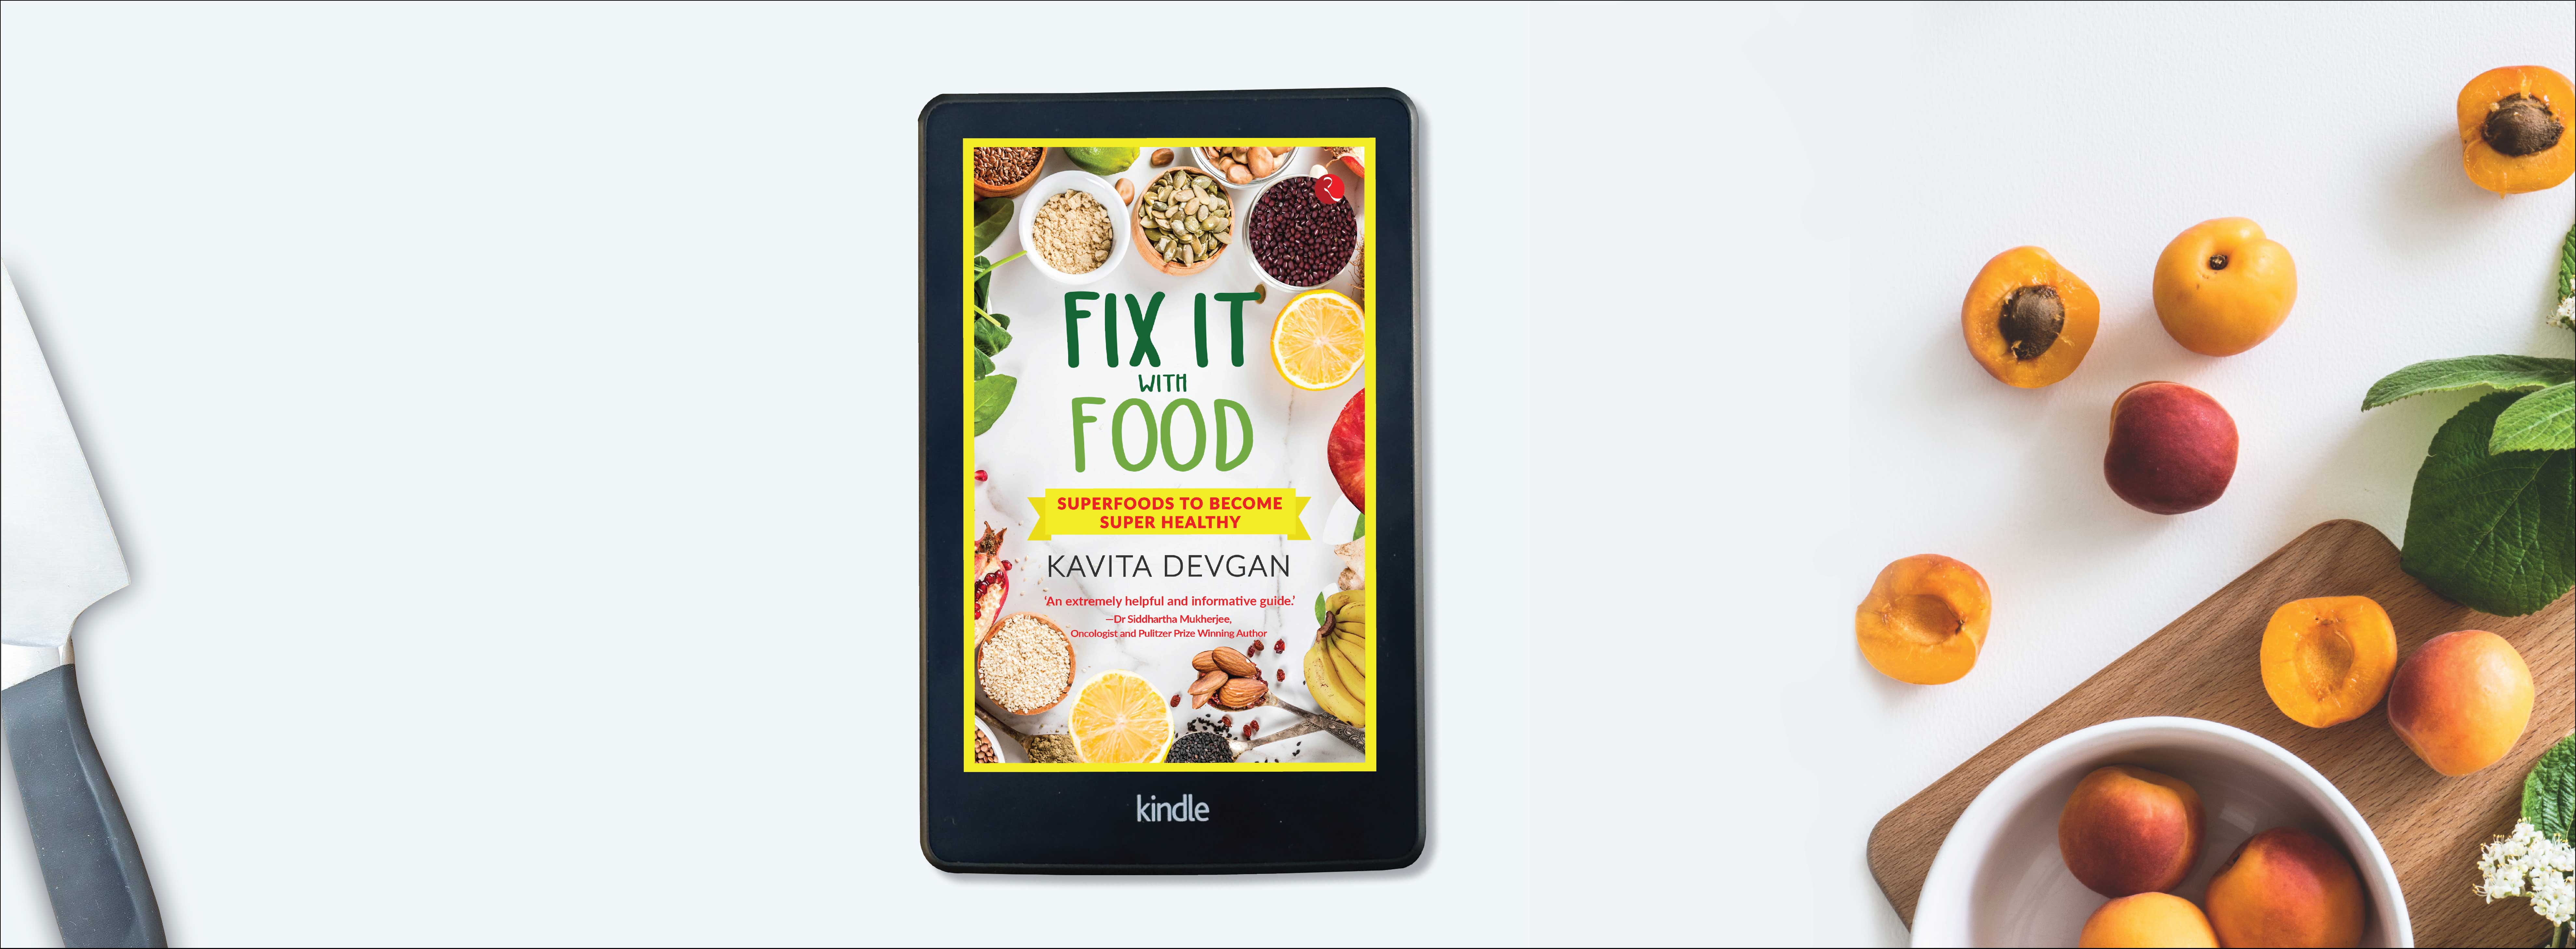 7 Foods That Help Correct Hormonal Imbalance – 'Fix it With Food' by Kavita  Devgan | Rupa Publications